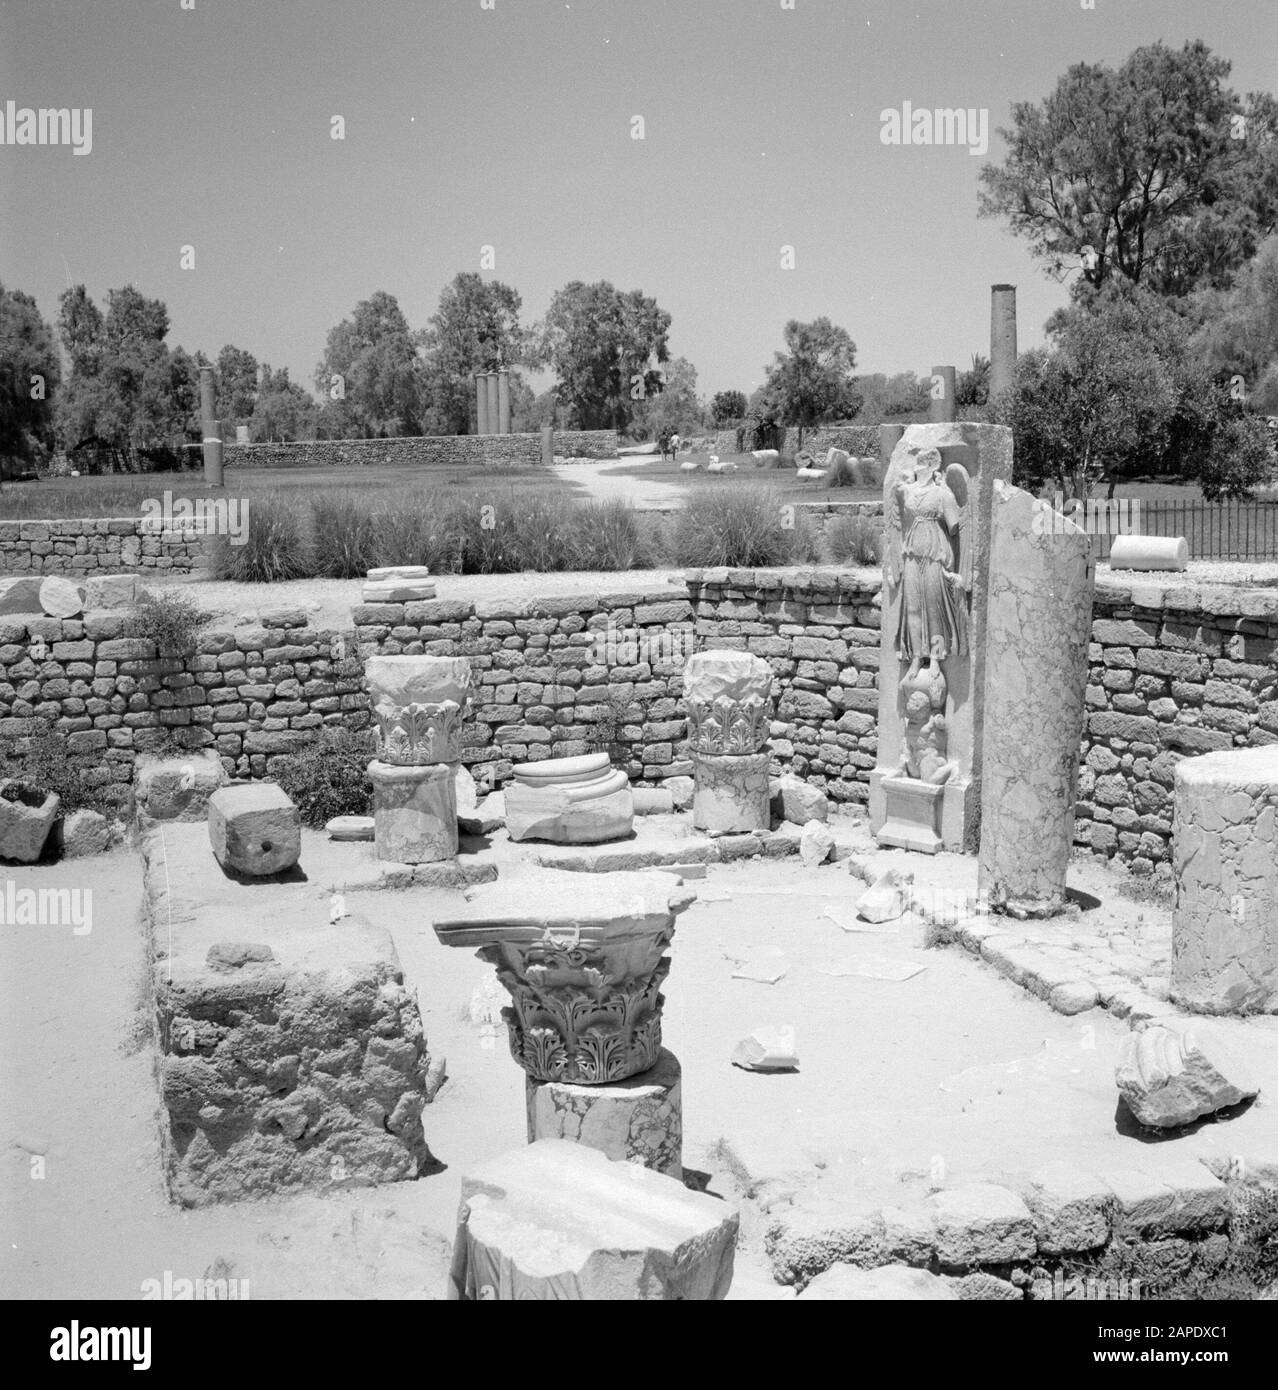 Israel 1964-1965: Ashkelon, archaeology Description: Archaeological site with building fragments including a statue of the goddess of victory Nike or Victoria Annotation: Ashkelon is a seaside resort in the southwest of Israel, located on the Mediterranean Date: 1964 Location: Ashkelon, Israel Keywords: archeology, sculptures, mythology, pillars, religious art, ruins Personal name: Nike, Victoria Stock Photo